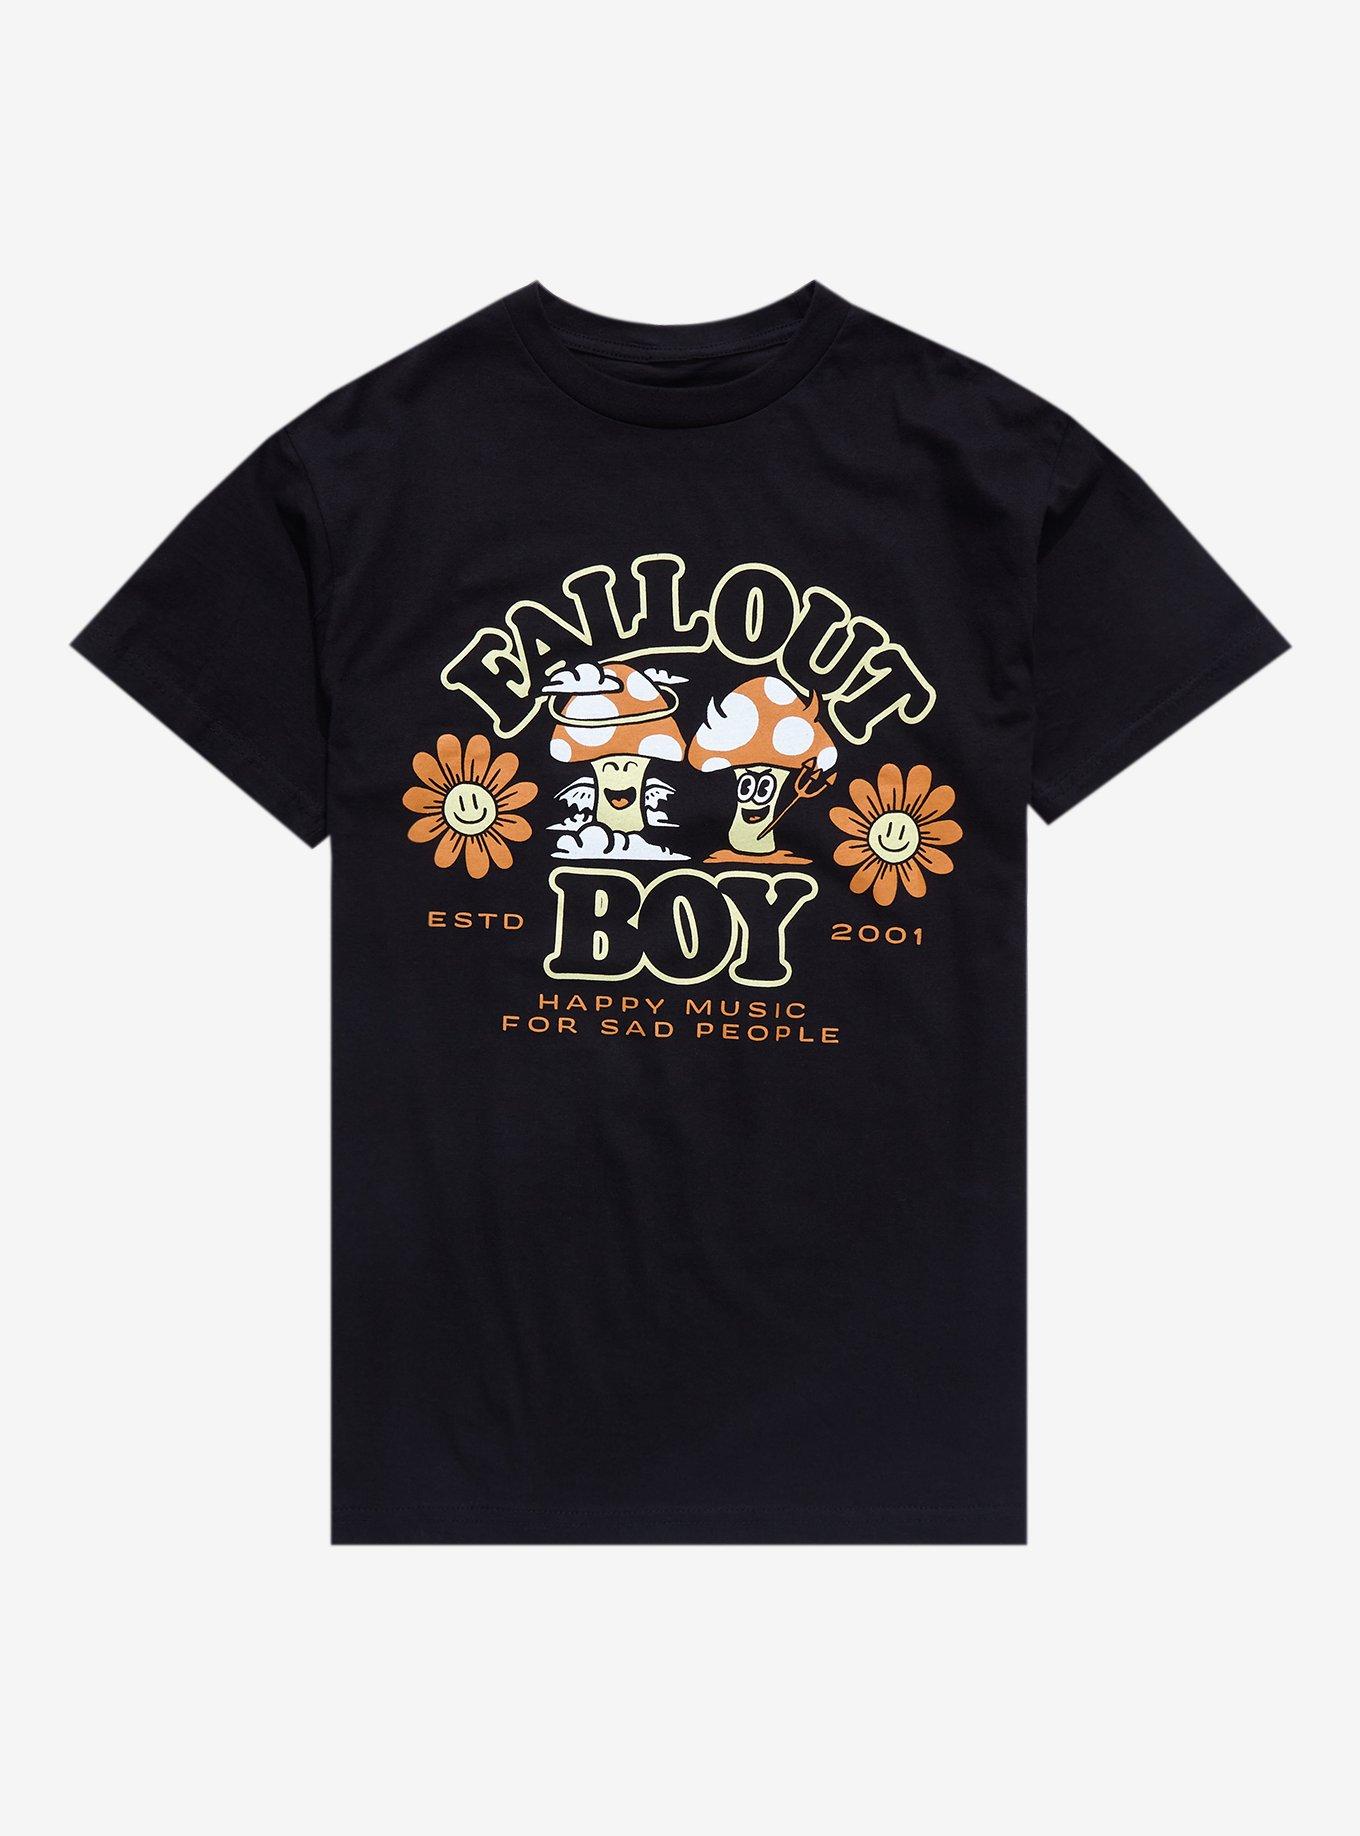 Fall Out Boy Happy Music For Sad People T-Shirt Hot Topic